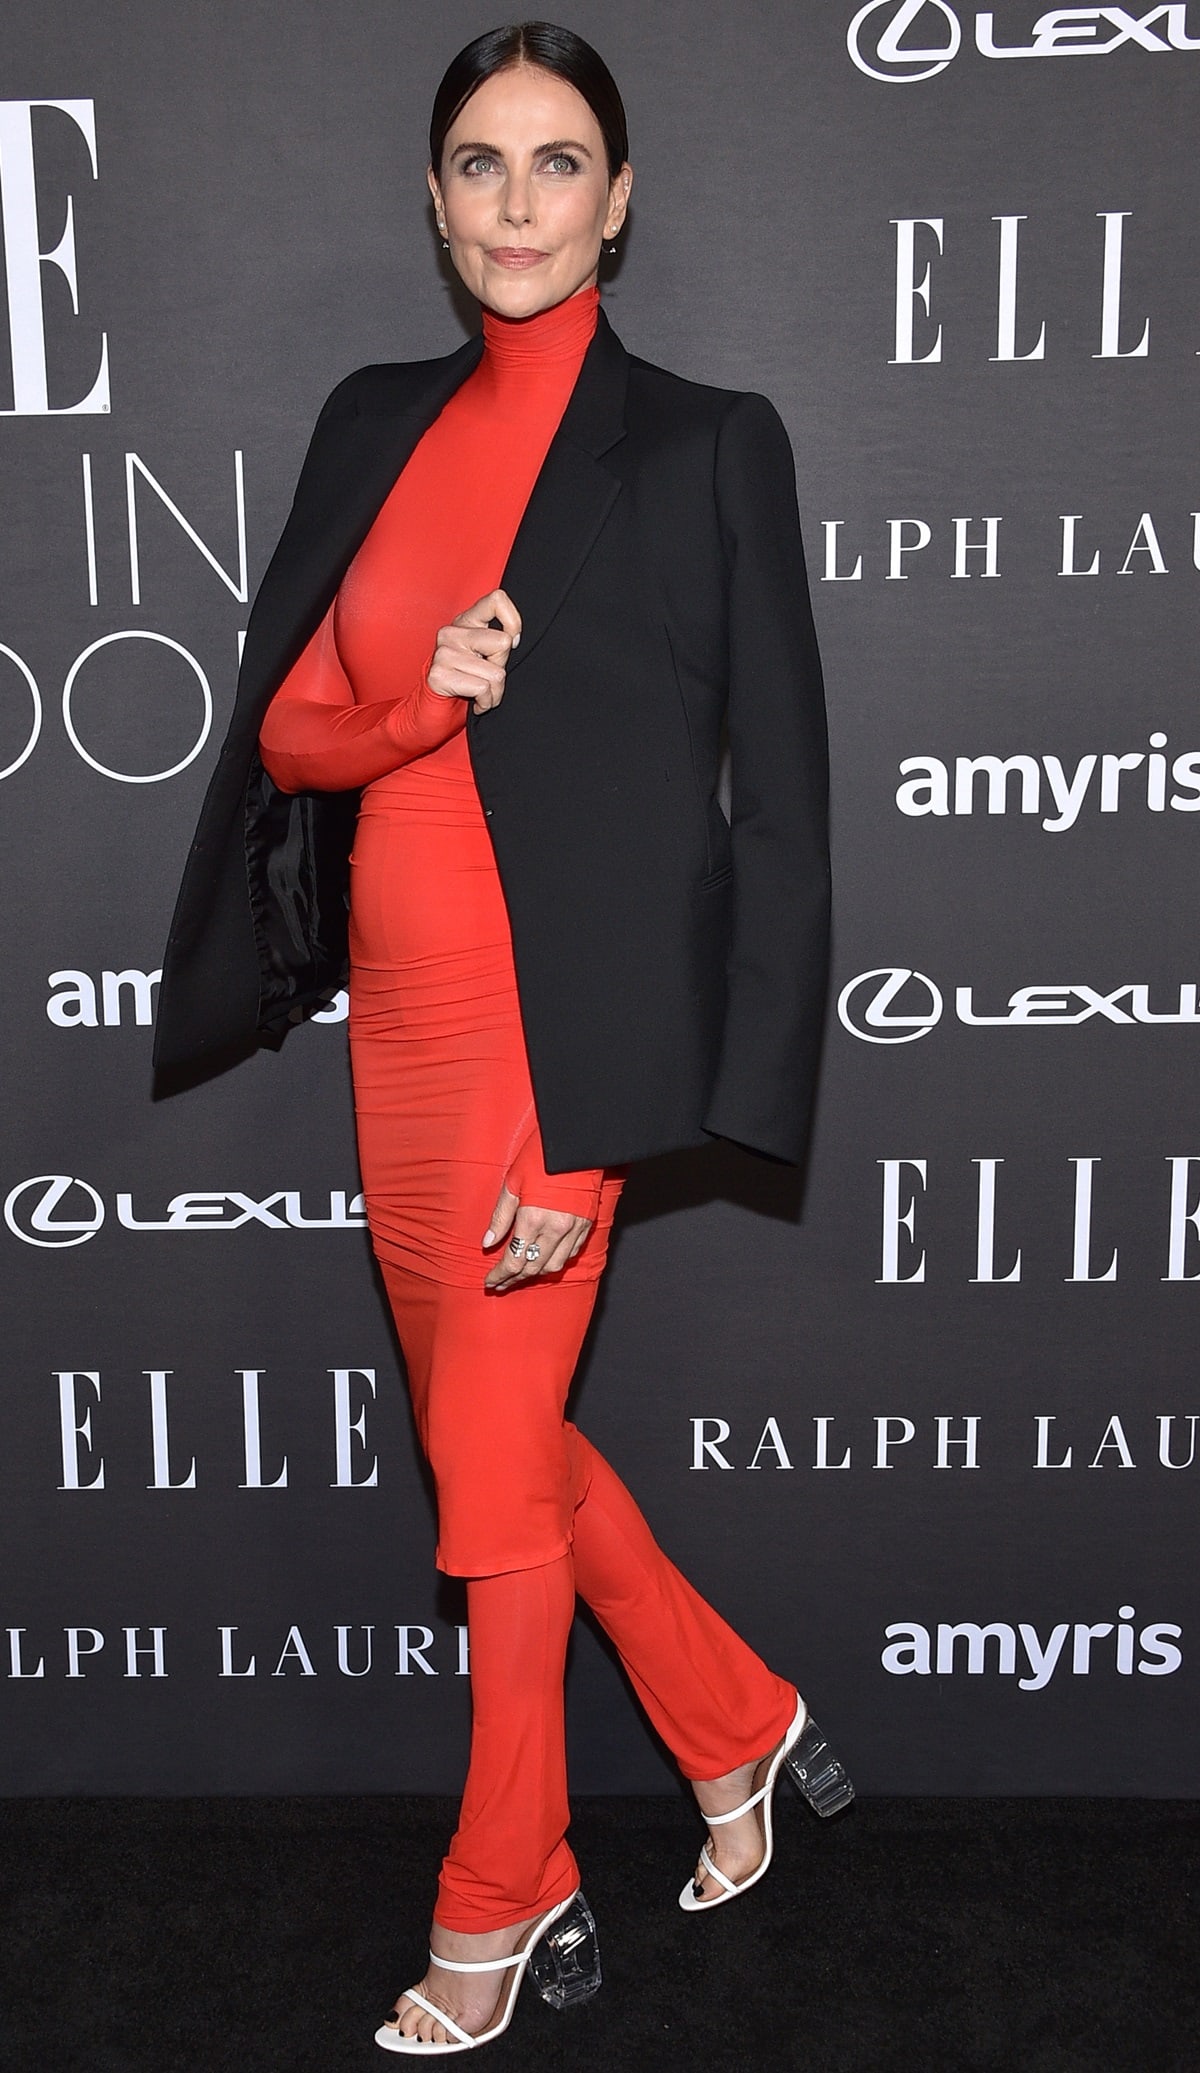 Charlize Theron donning a vibrant red Alaia outfit from the brand's Spring Summer 2023 collection at the 29th annual ELLE Women in Hollywood celebration